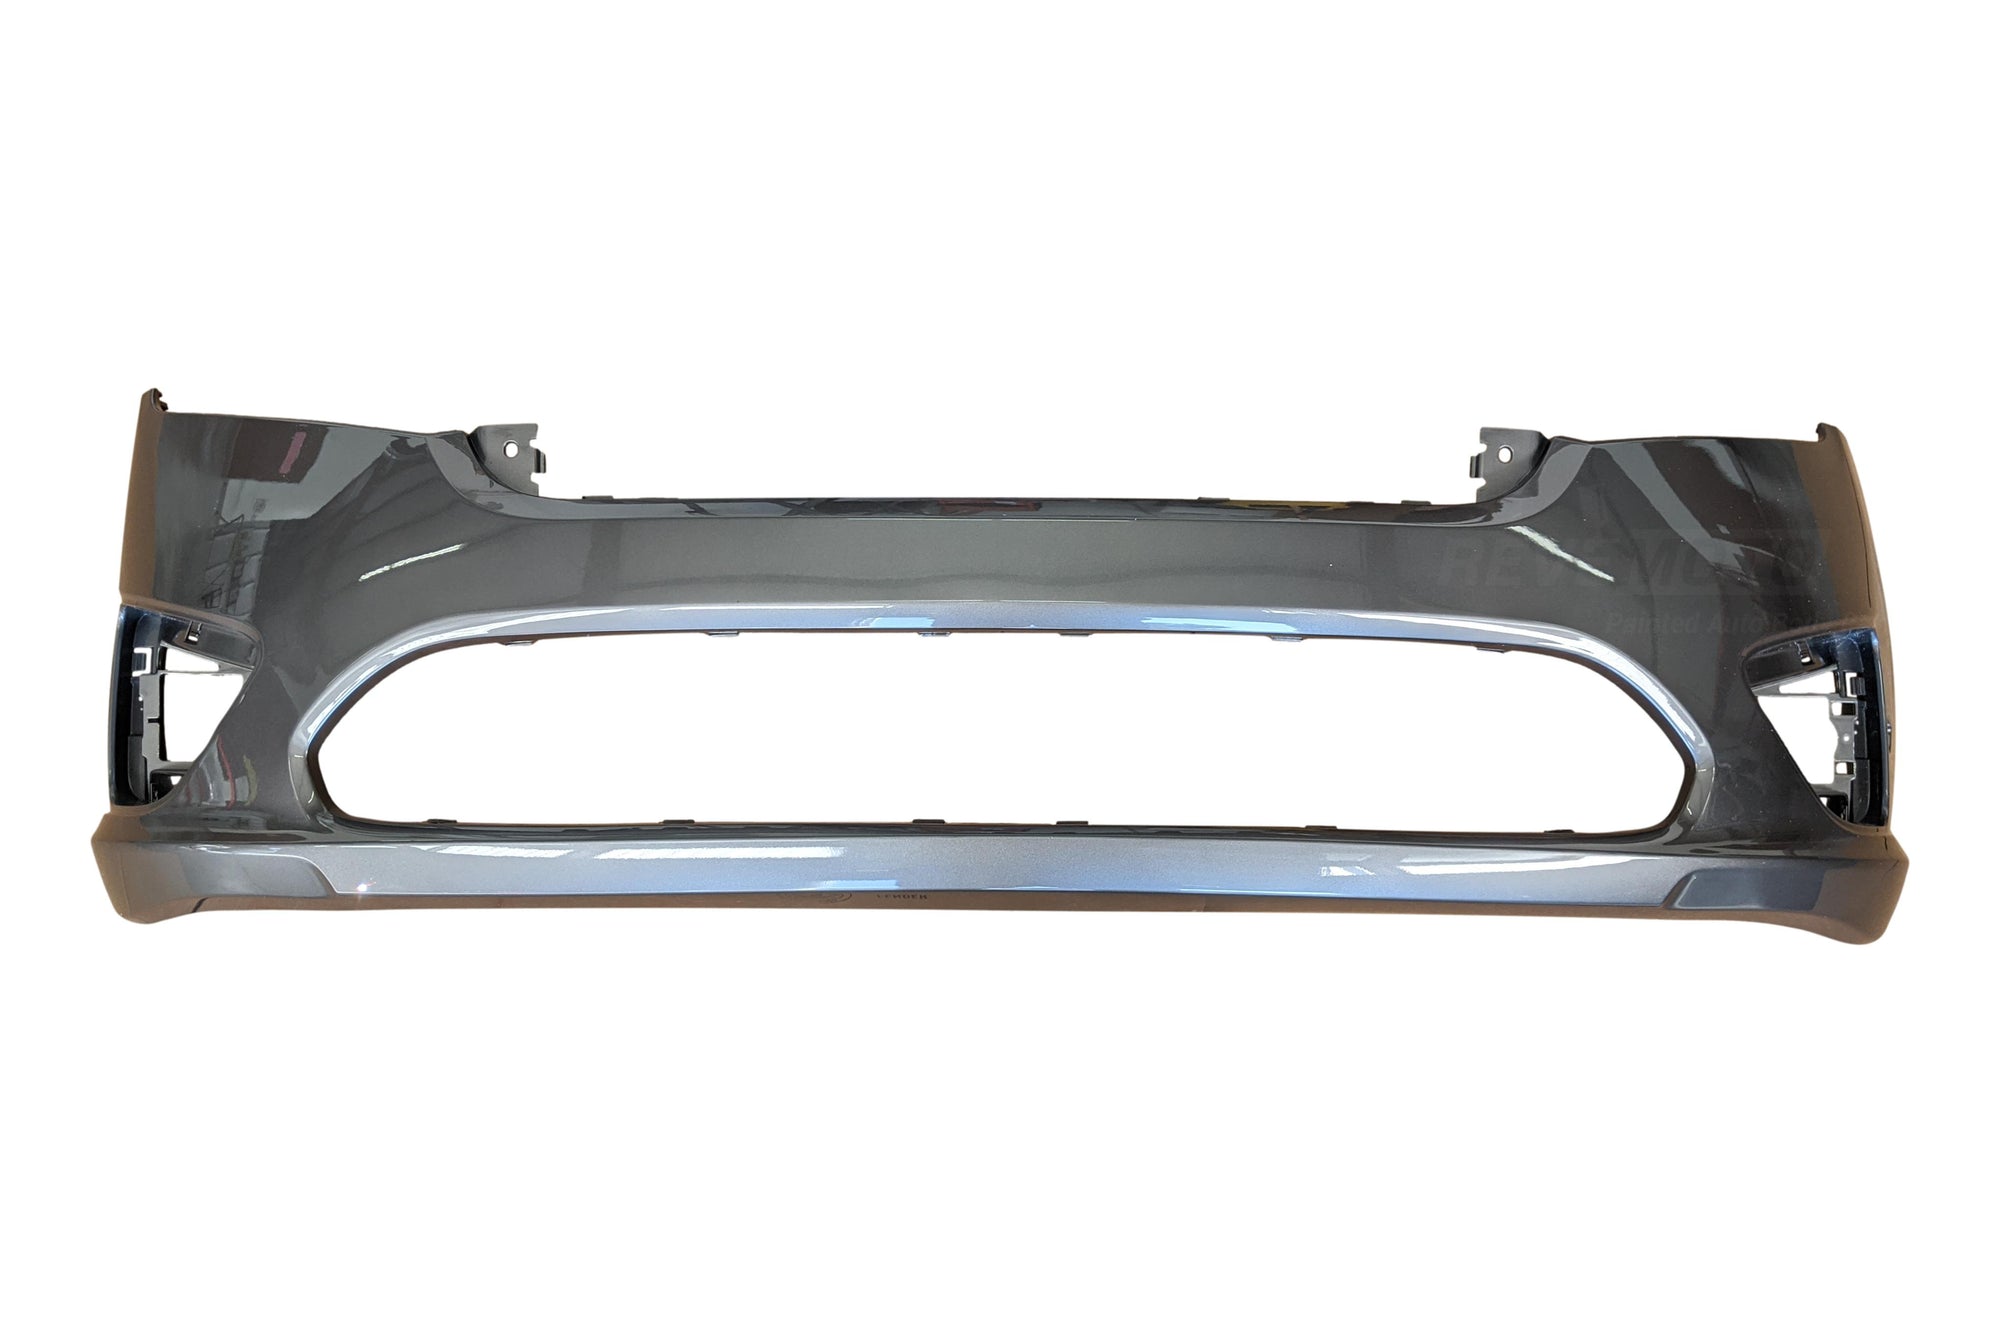 2010-2012 Ford Fusion Front Bumper Painted, Sterling Gray Metallic (UJ) AE5Z17D957BAPTM FO1000650